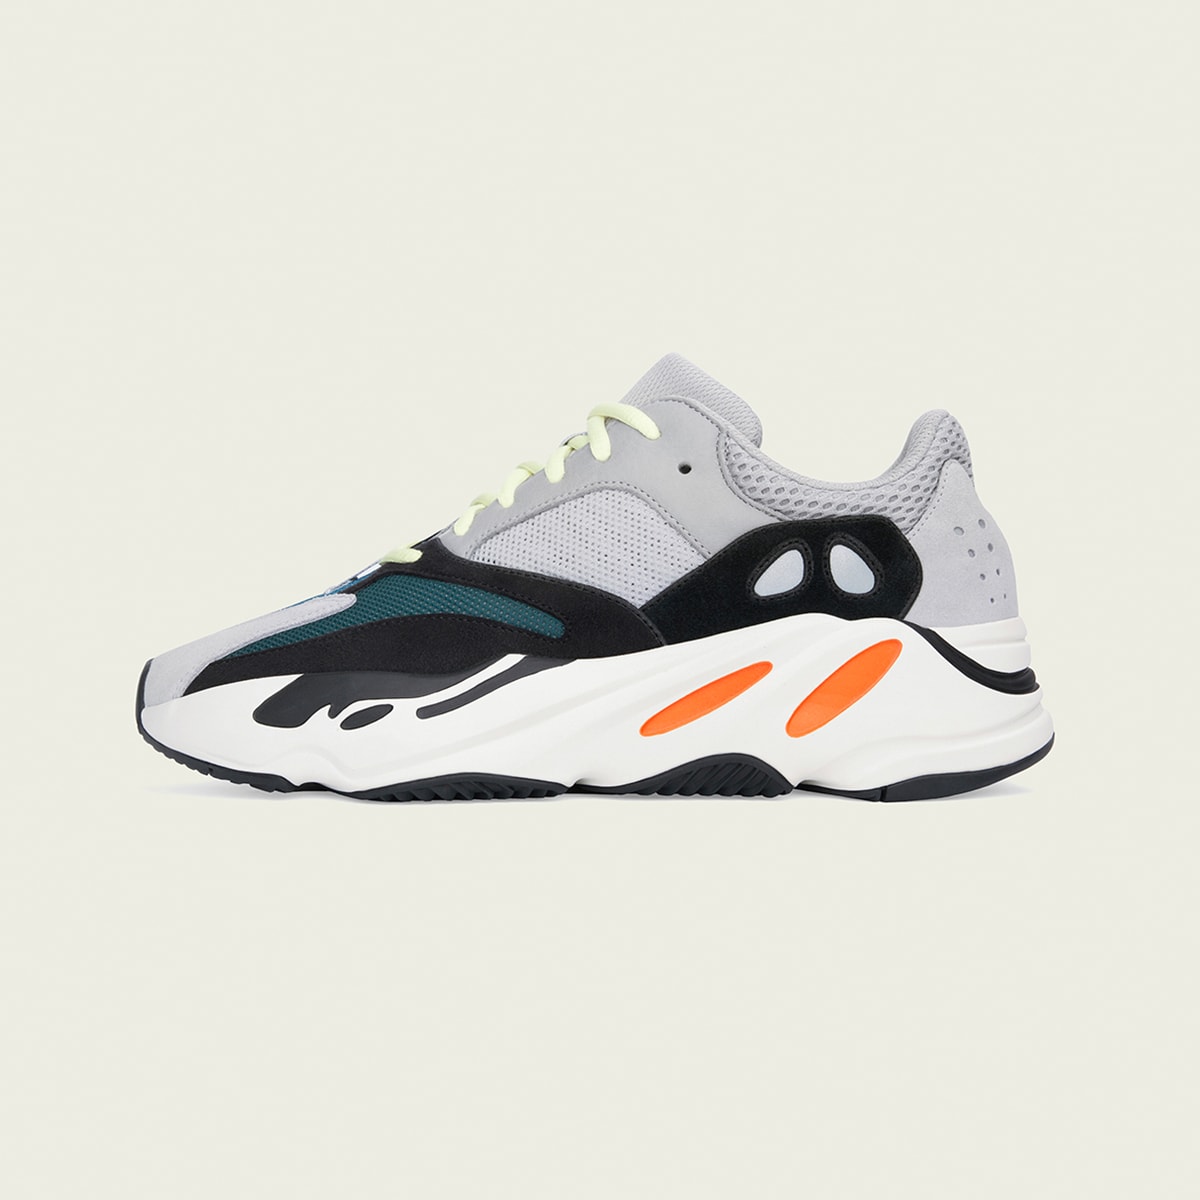 end clothing yeezy 700